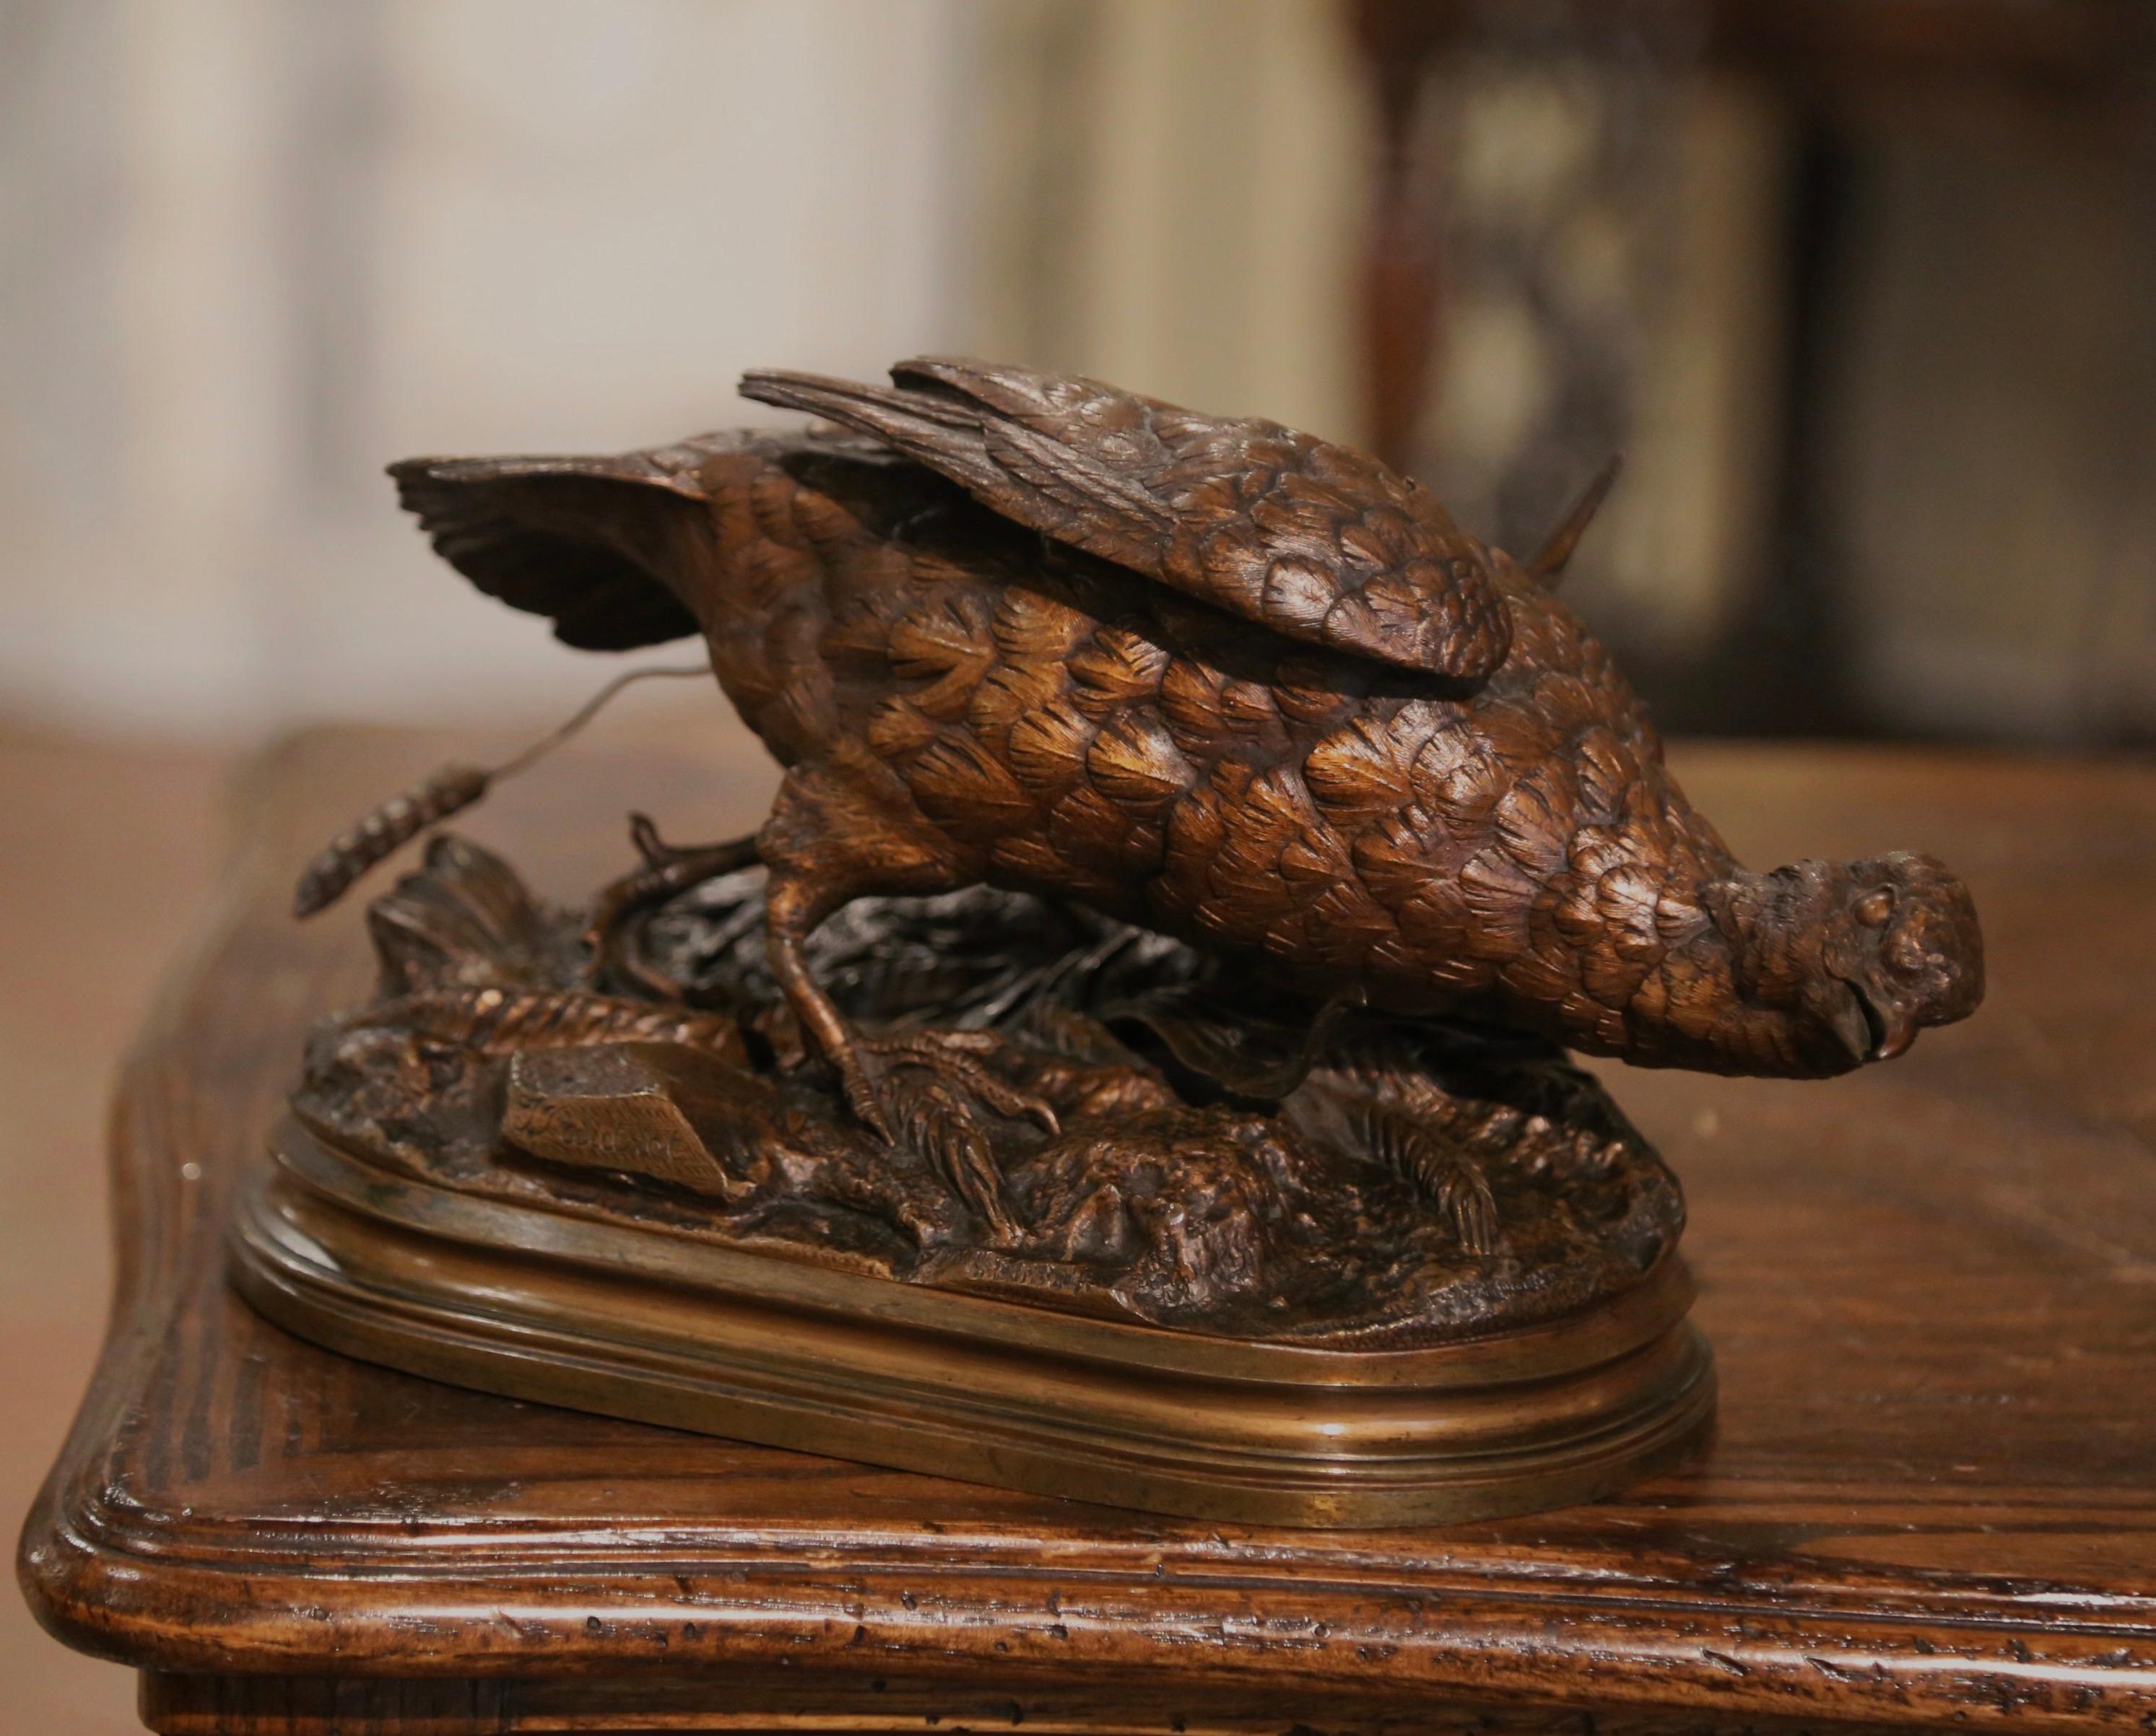 Accessorize a man's office or desk with this elegant antique bronze bird composition. Crafted in France circa 1895, the avian sculpture features a pheasant standing on rocky ground covered with wheat stems; the artwork is signed on the base by